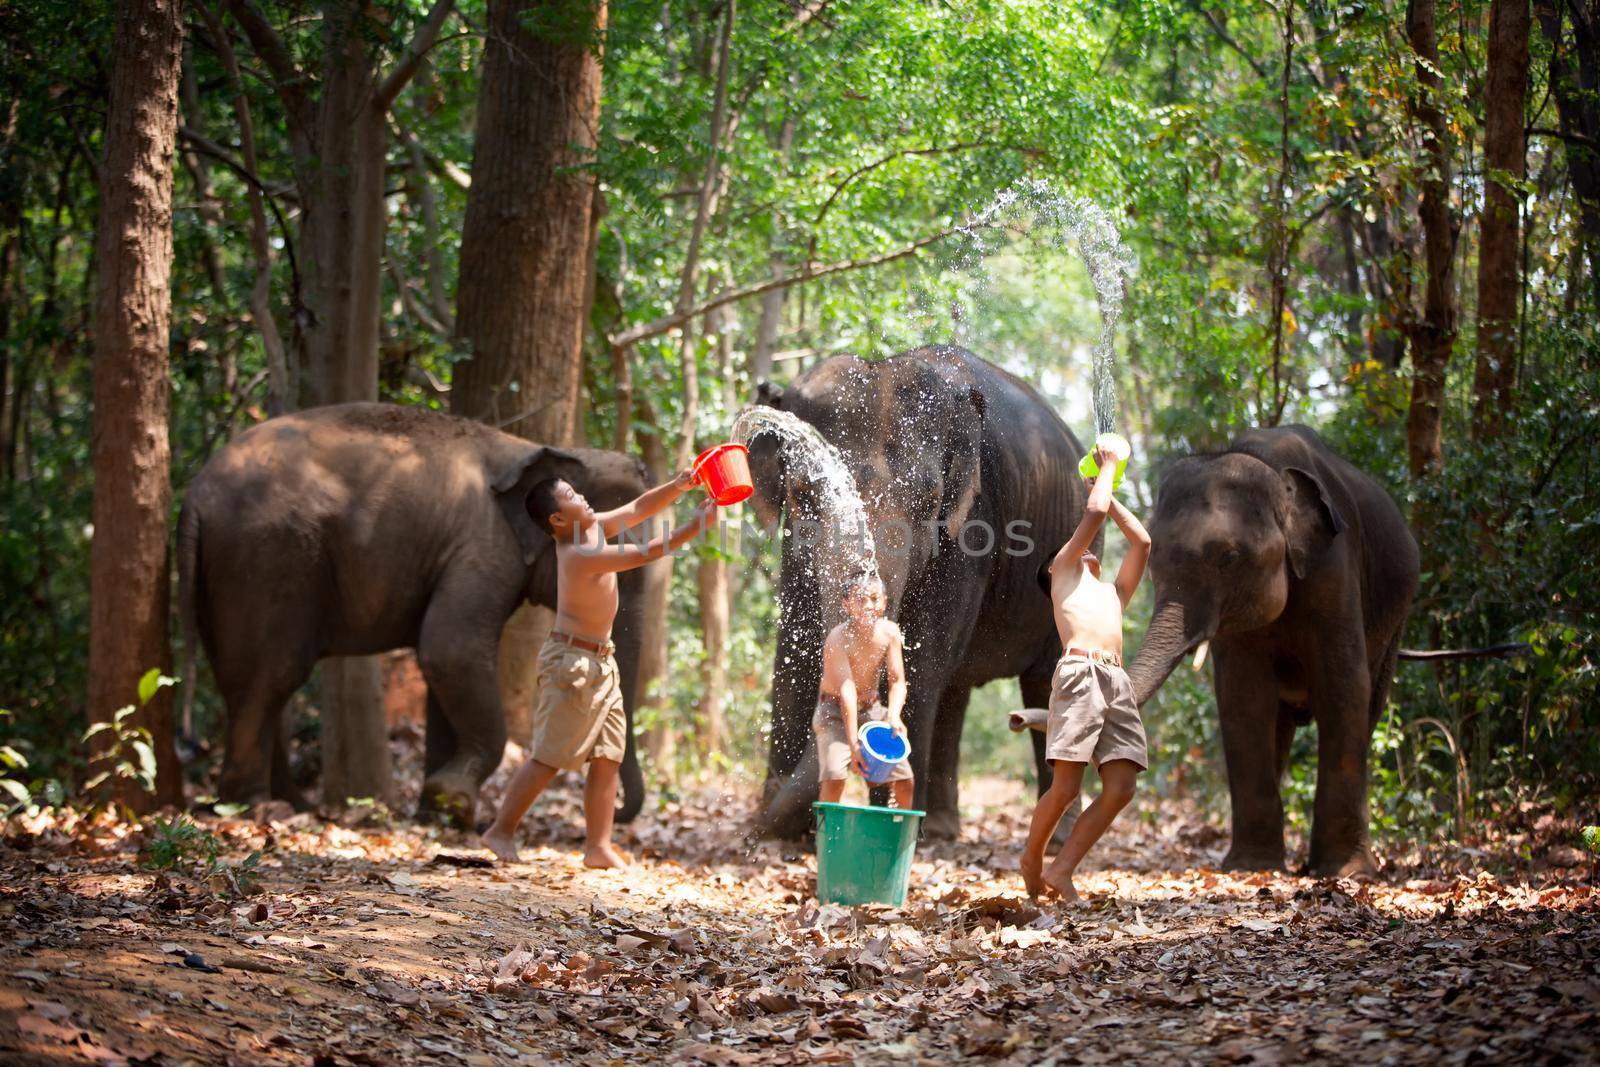 Children play with water in forest against elephants.